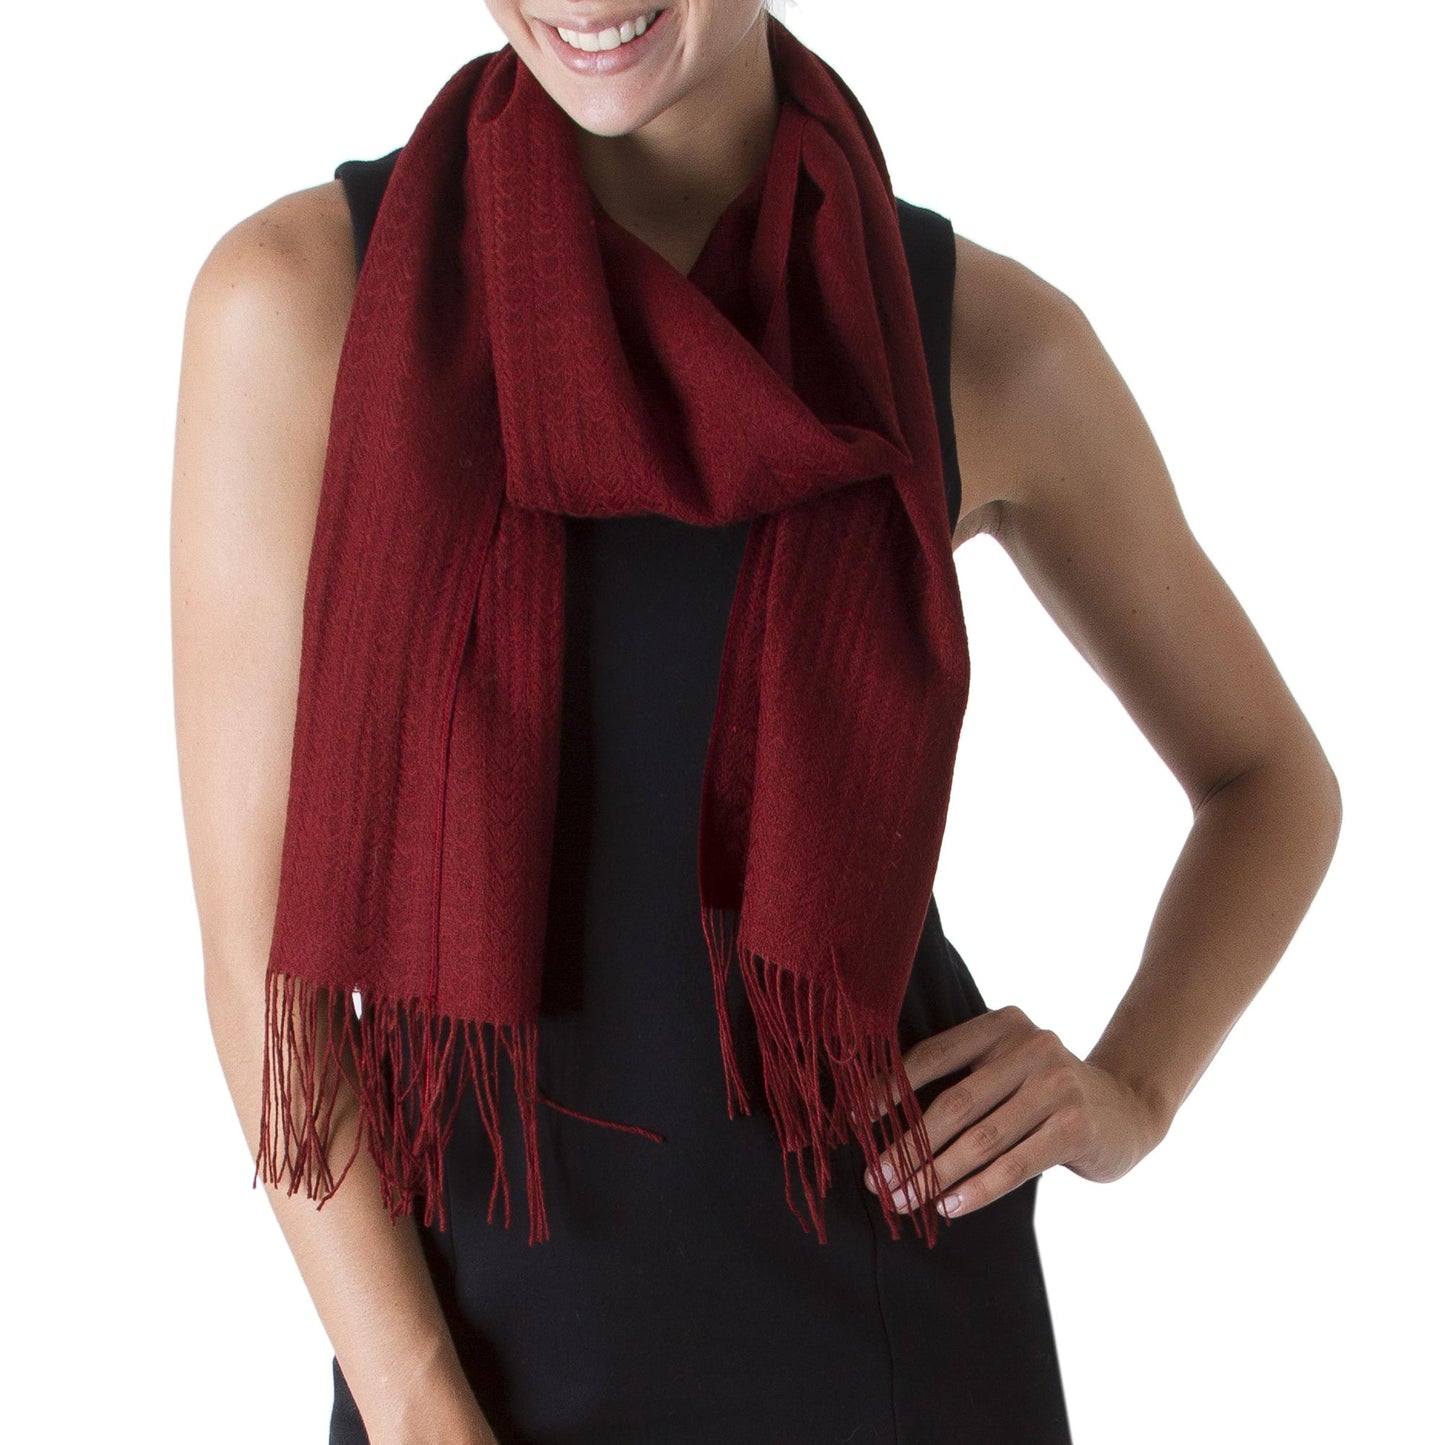 Apple Rose Rich Red Patterned Scarf Knit in Alpaca and Pima Cotton